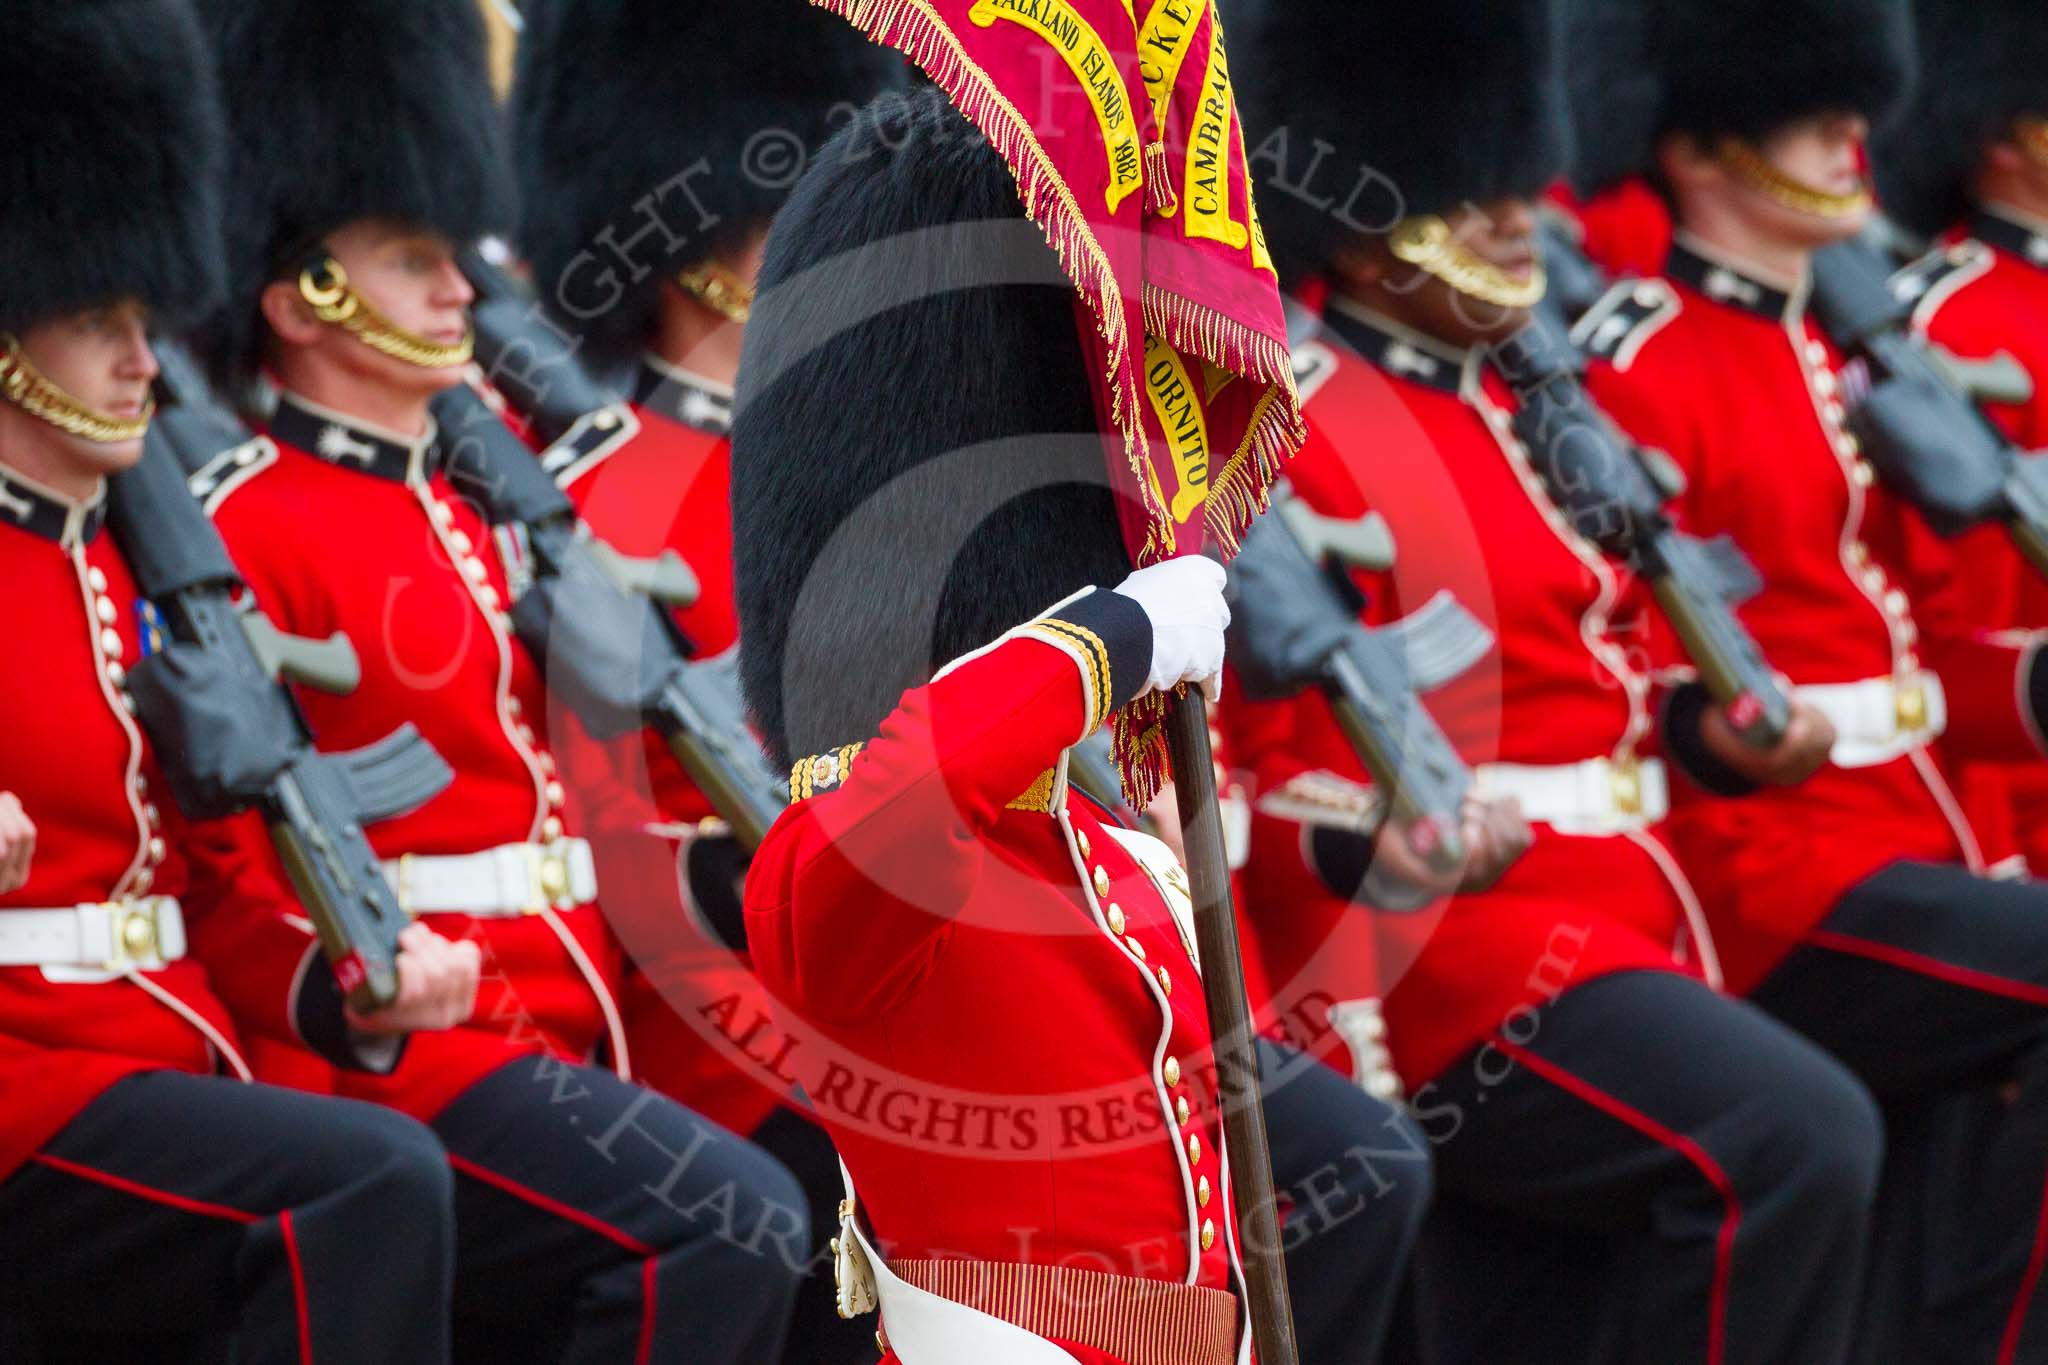 Trooping the Colour 2015. Image #451, 13 June 2015 11:34 Horse Guards Parade, London, UK